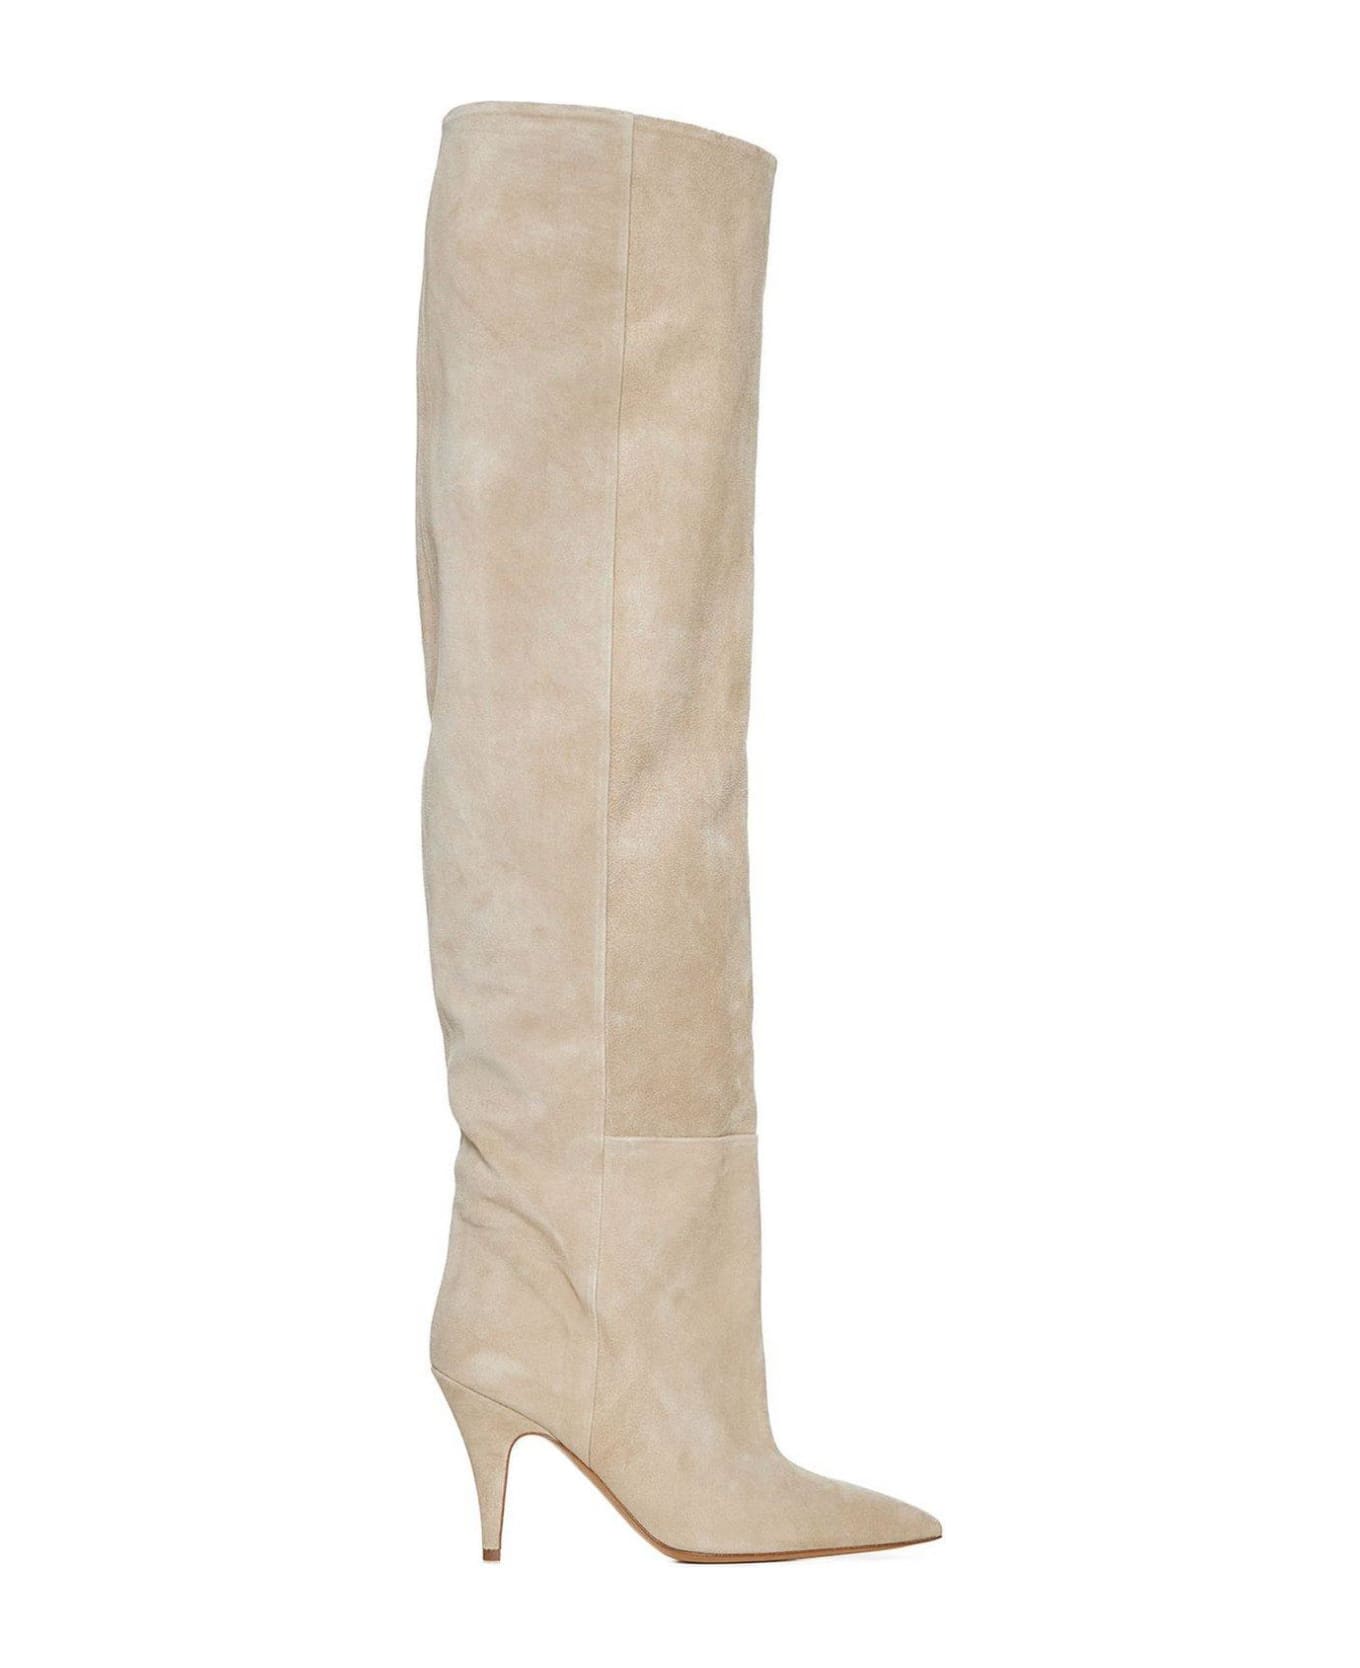 Khaite The River Pointed-toe Knee-high Boots - Beige suede ブーツ